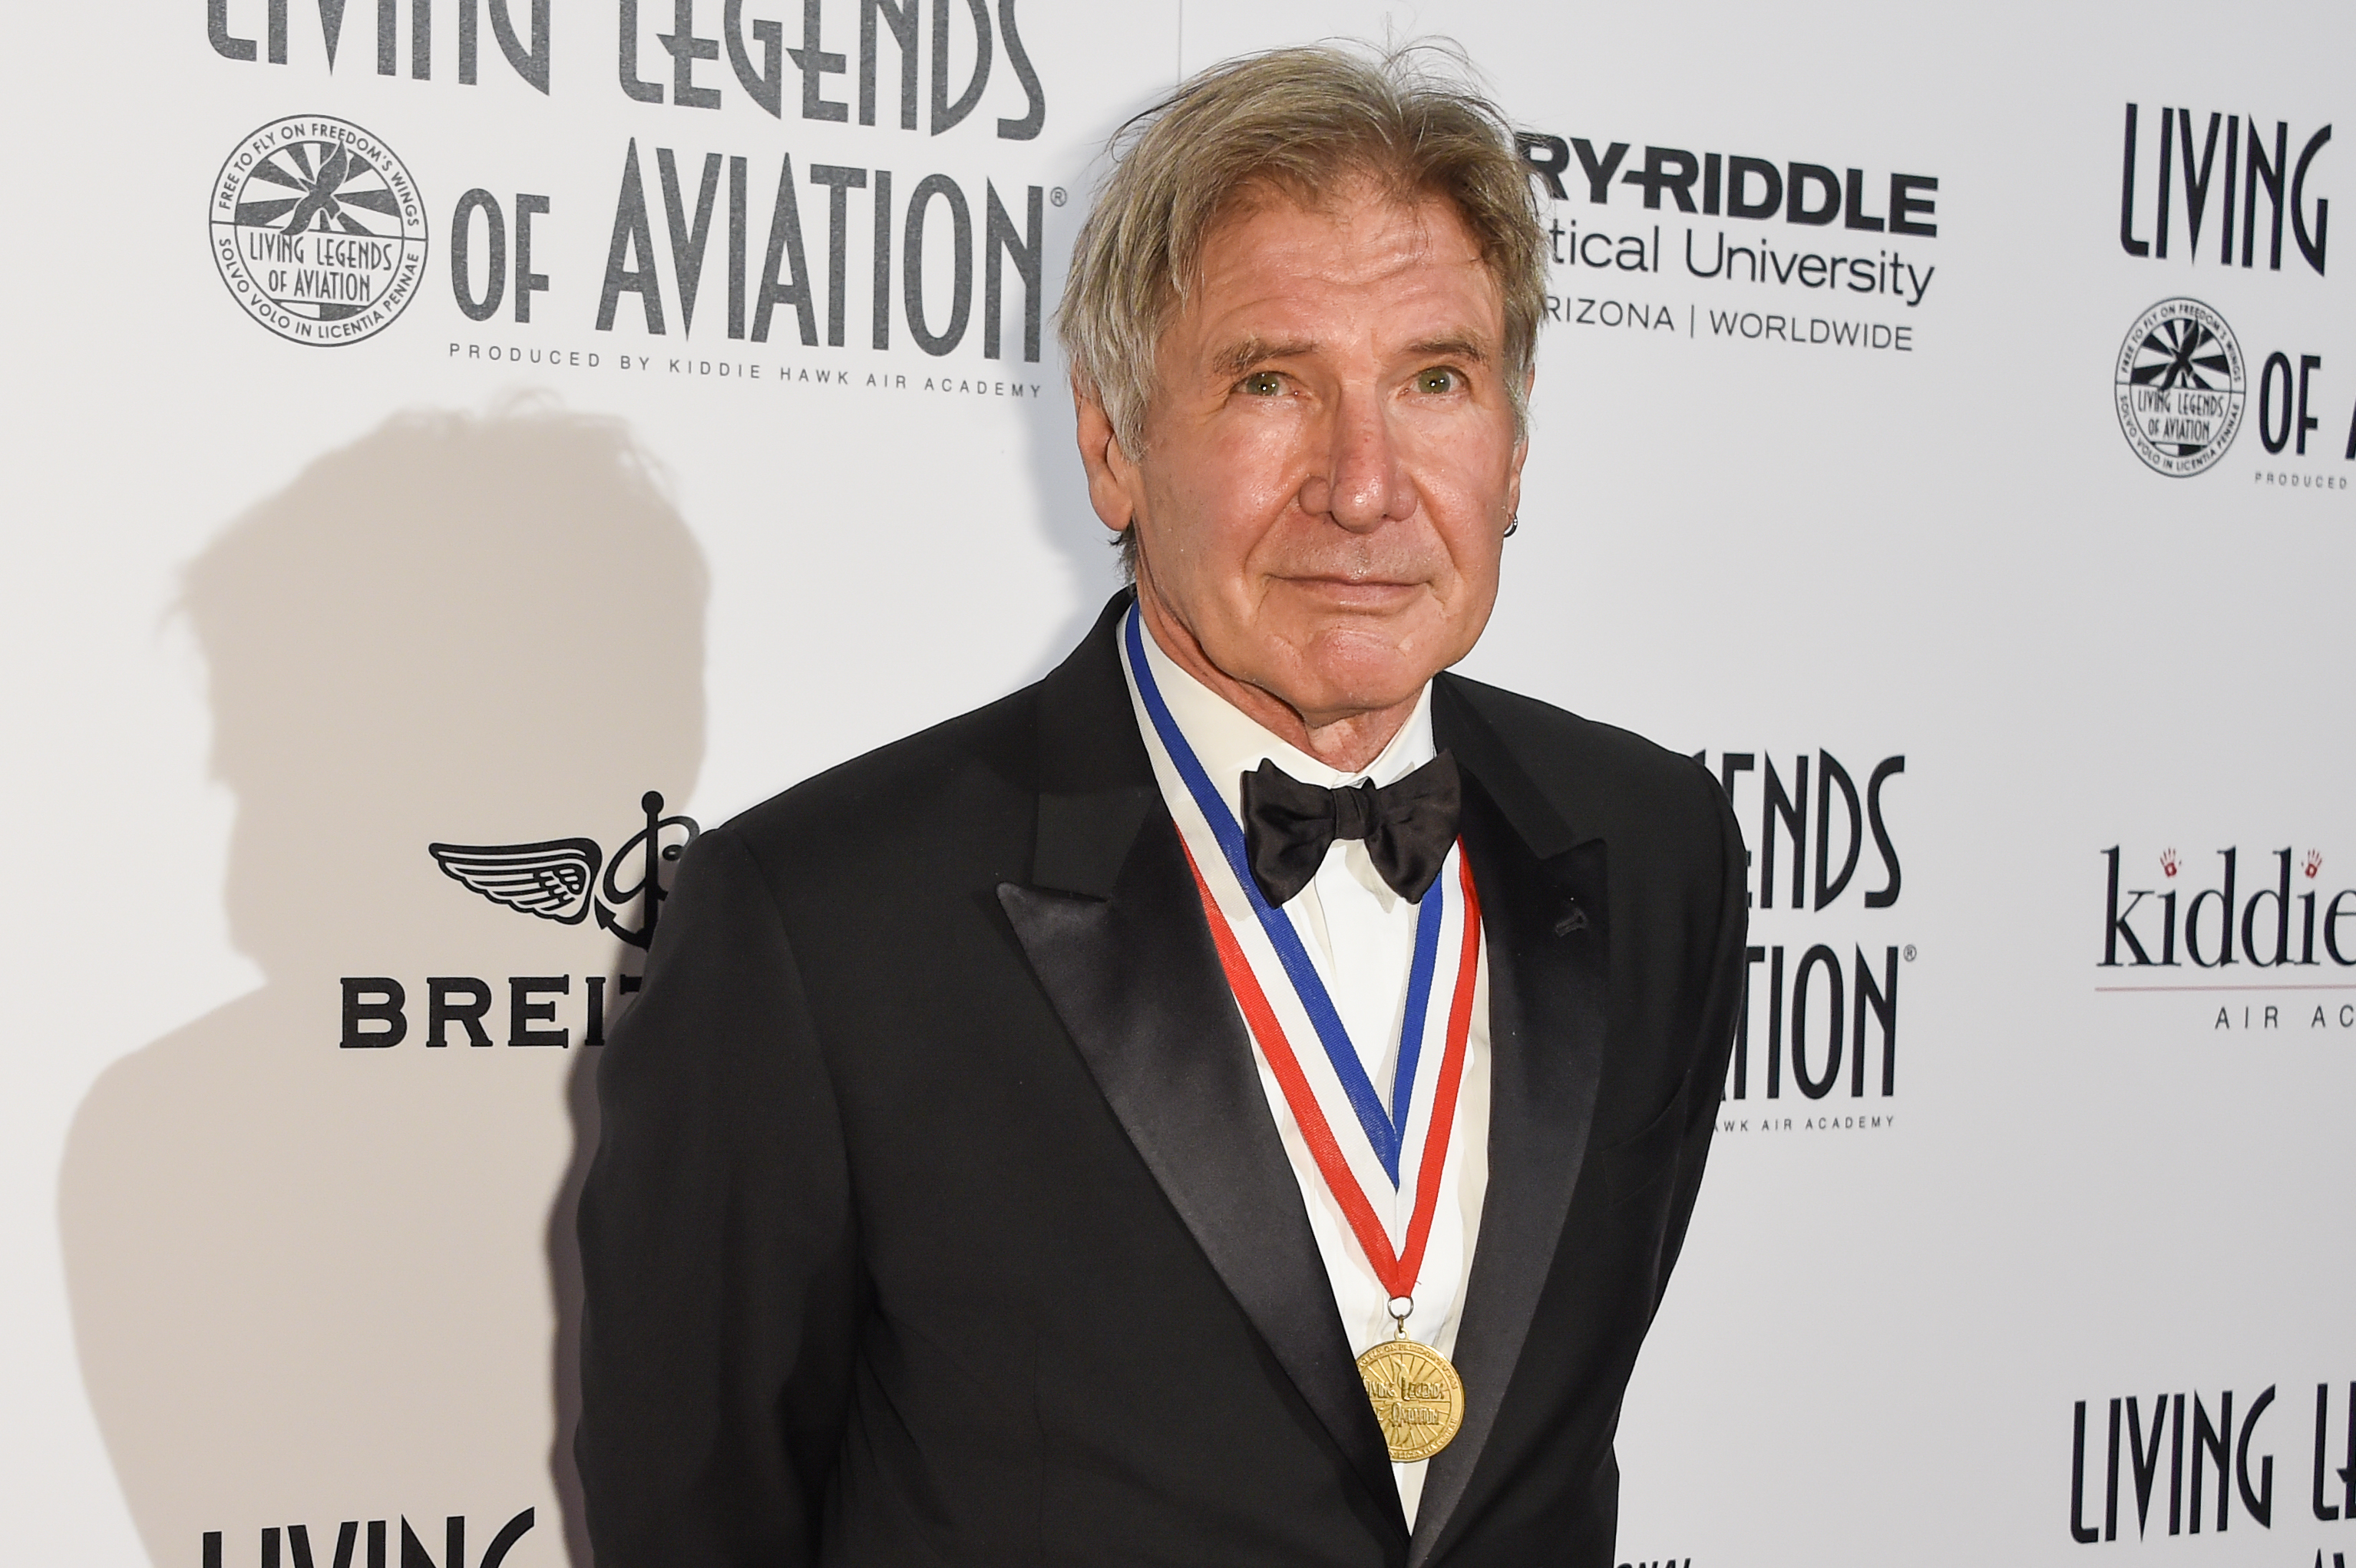 Harrison Ford attends the 12th Annual Living Legends of Aviation Awards at The Beverly Hilton Hotel on Friday, Jan 16, 2015, in Los Angeles